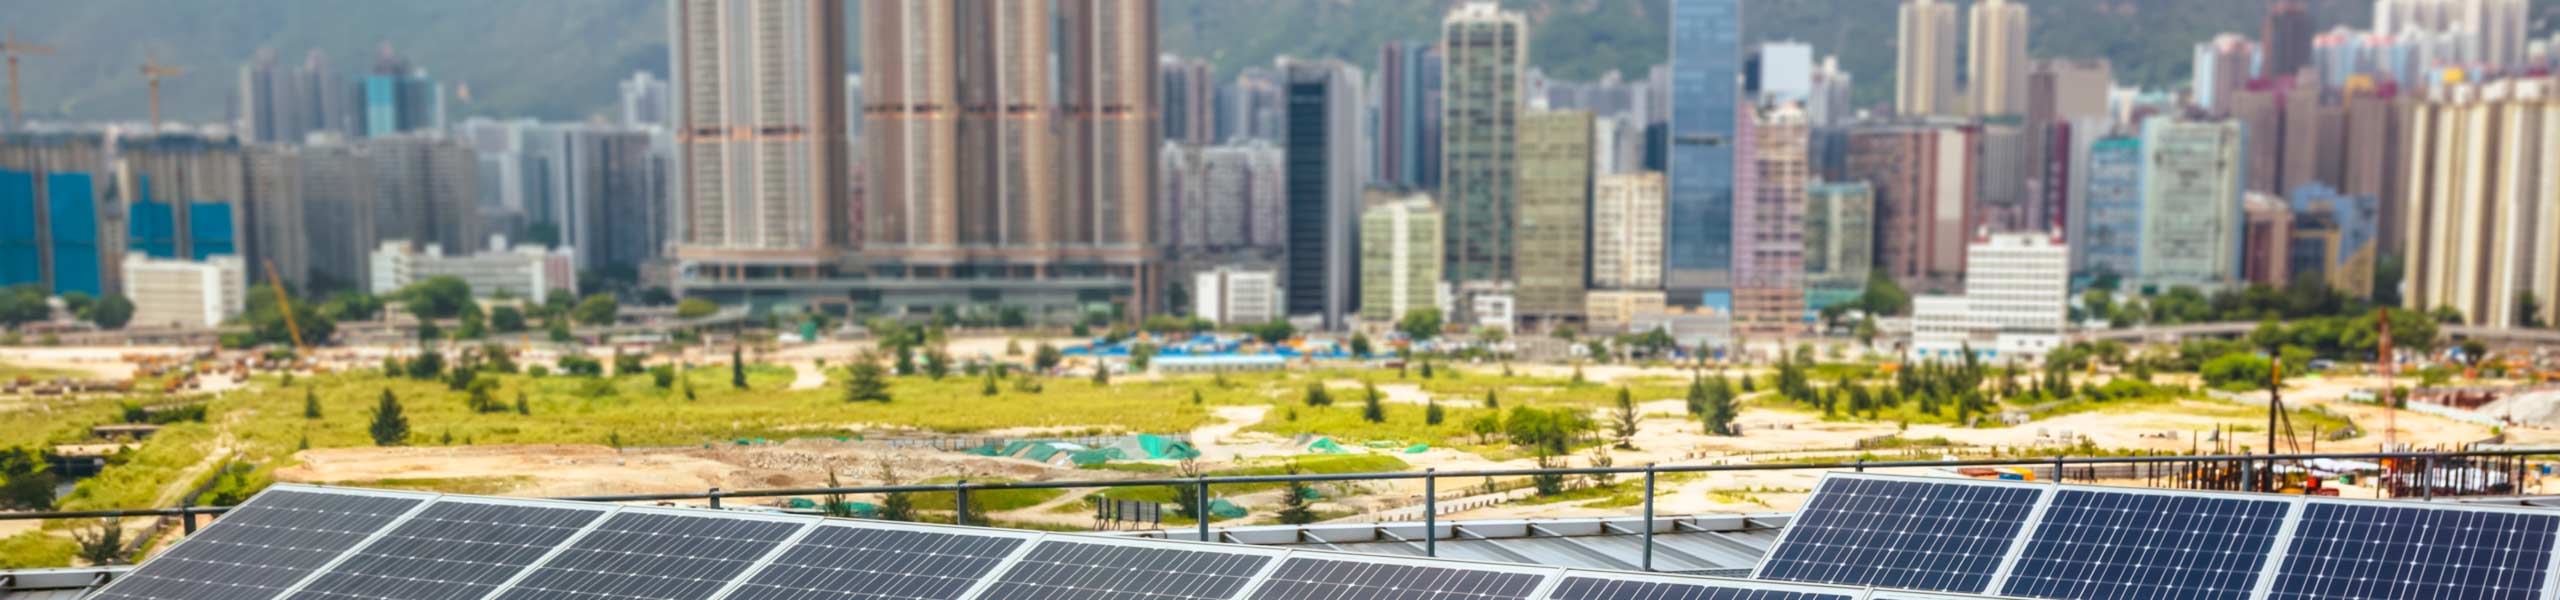 Solar Panels with a modern city background